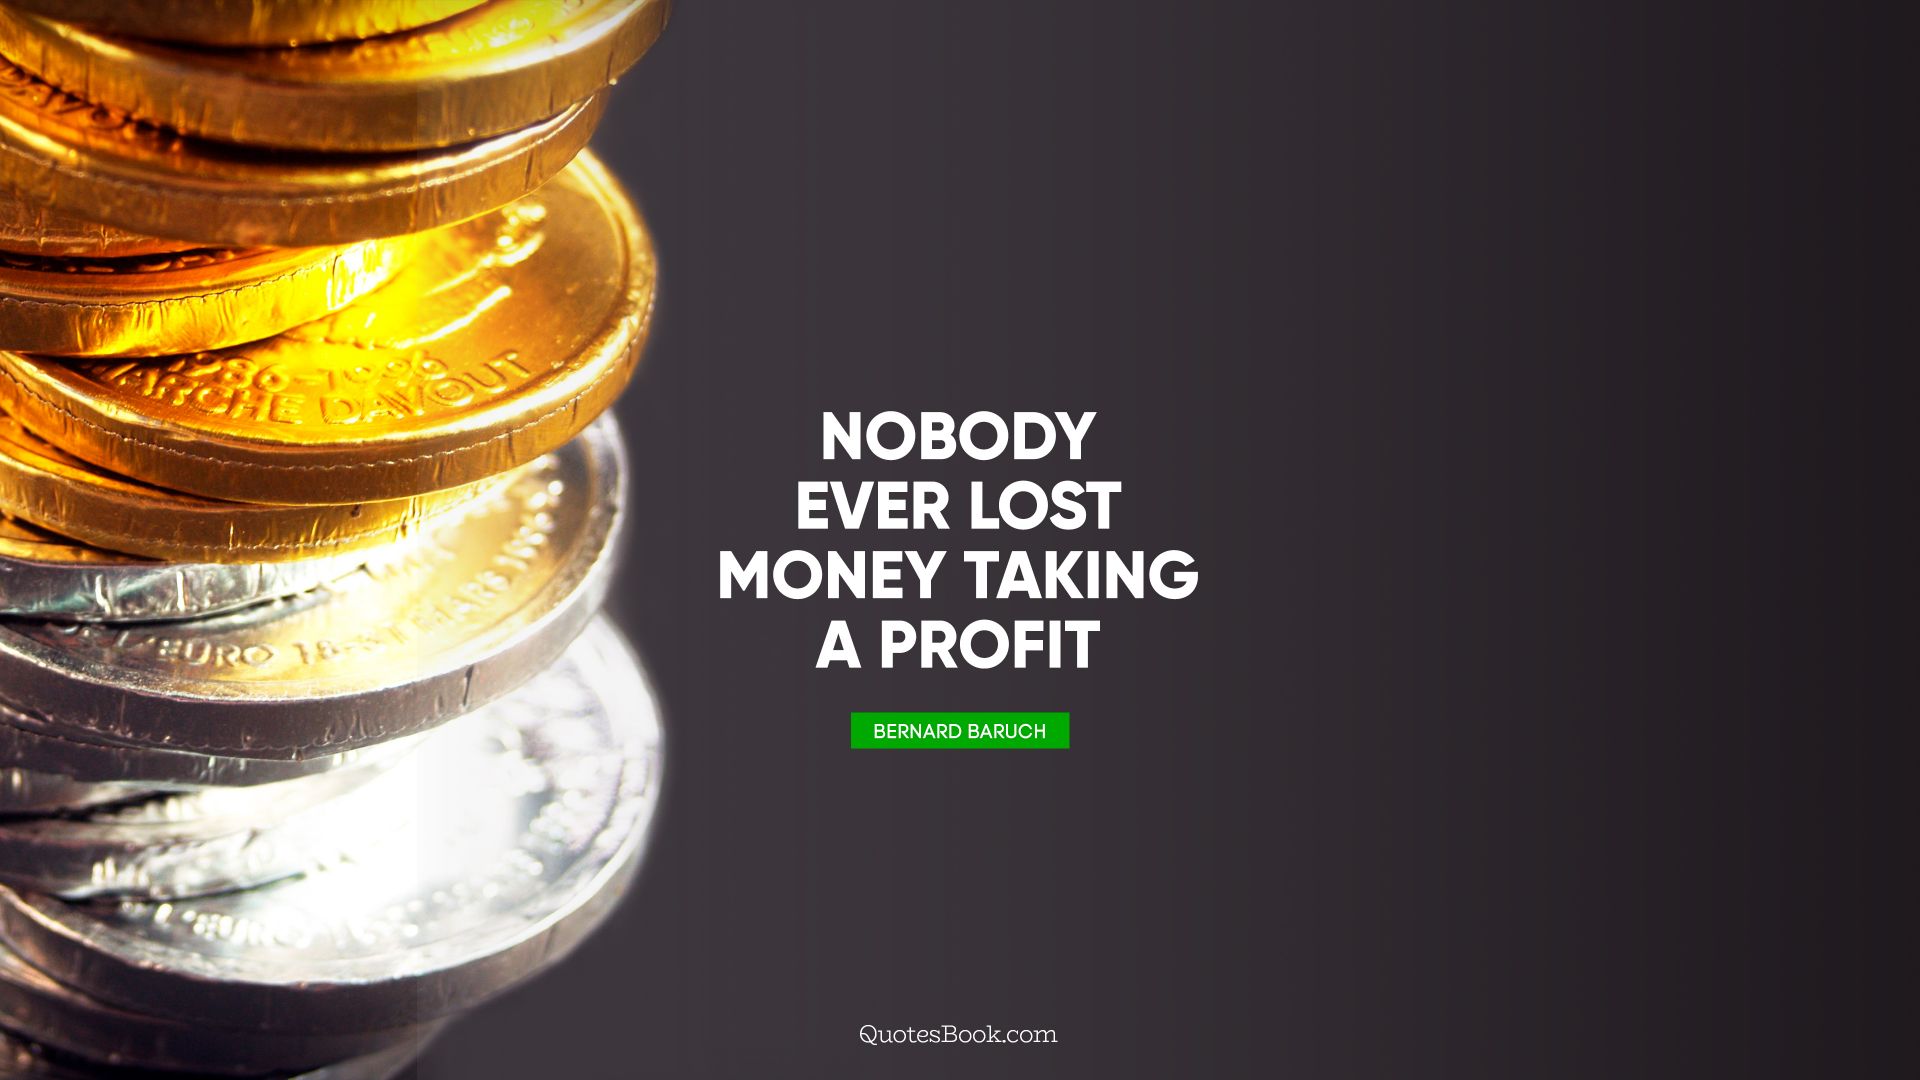 Nobody ever lost money taking a profit. - Quote by Bernard Baruch